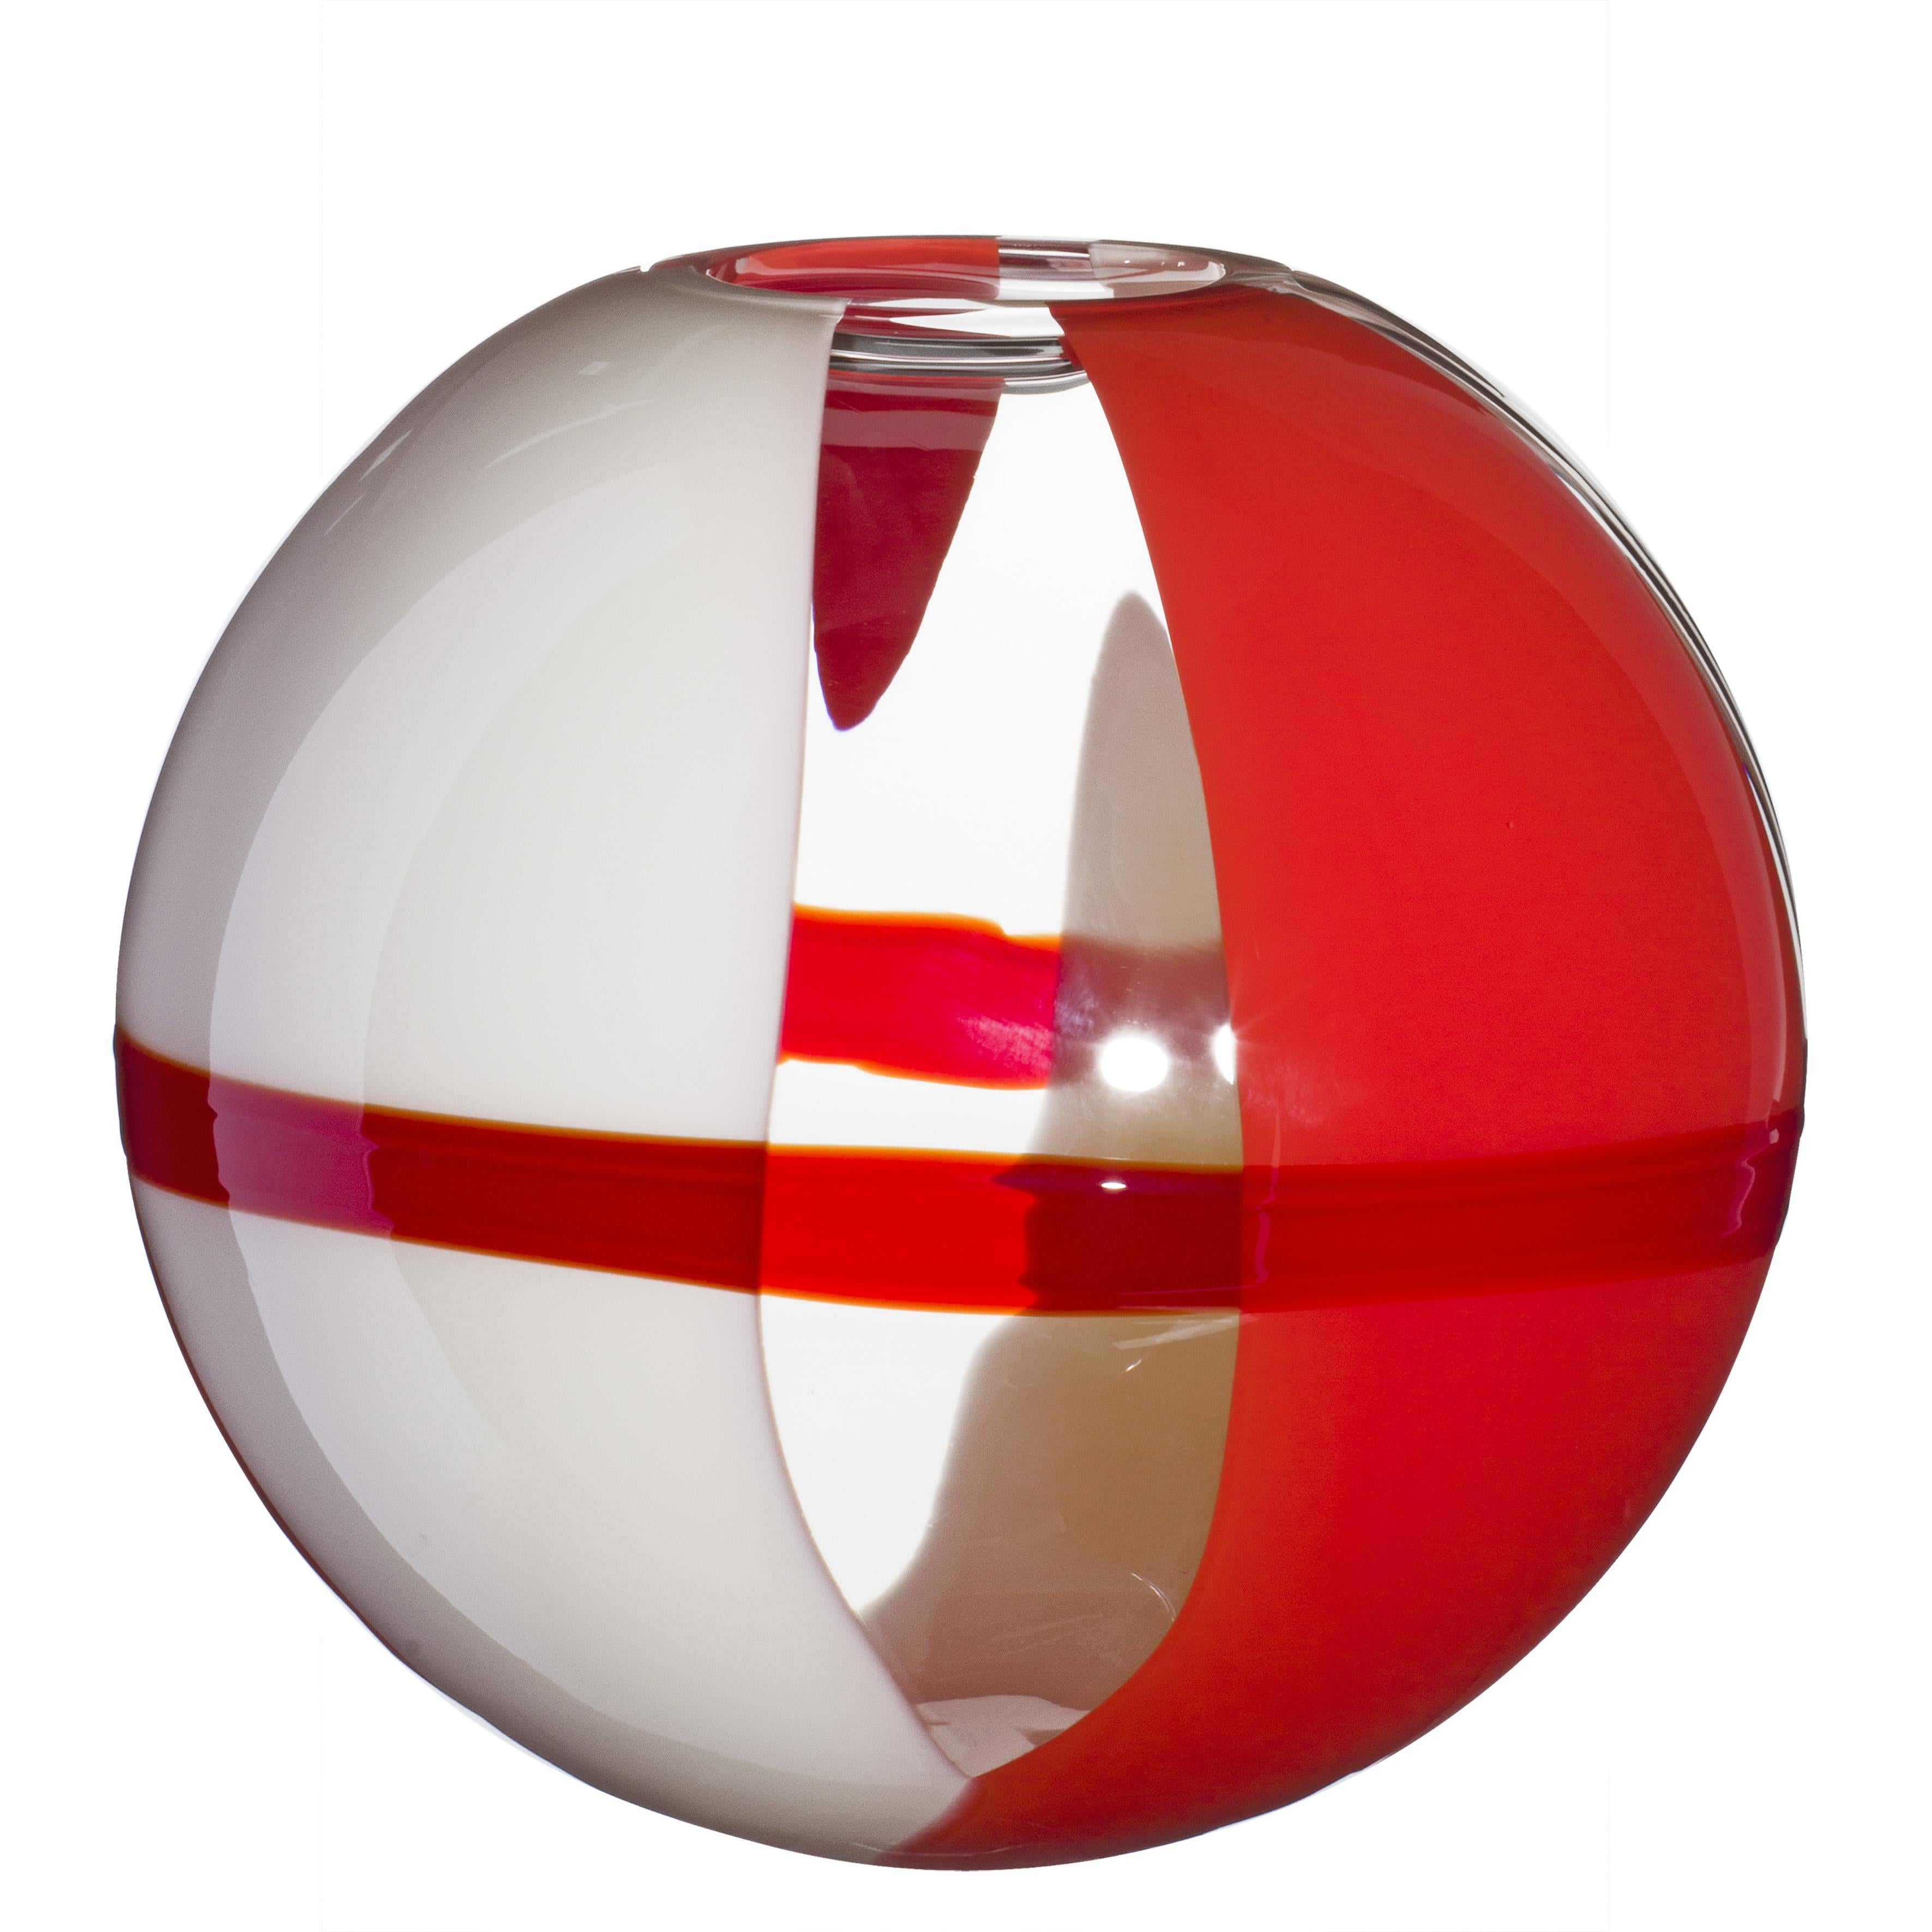 Large Sfera Vase in Orange, Red, and Ivory by Carlo Moretti